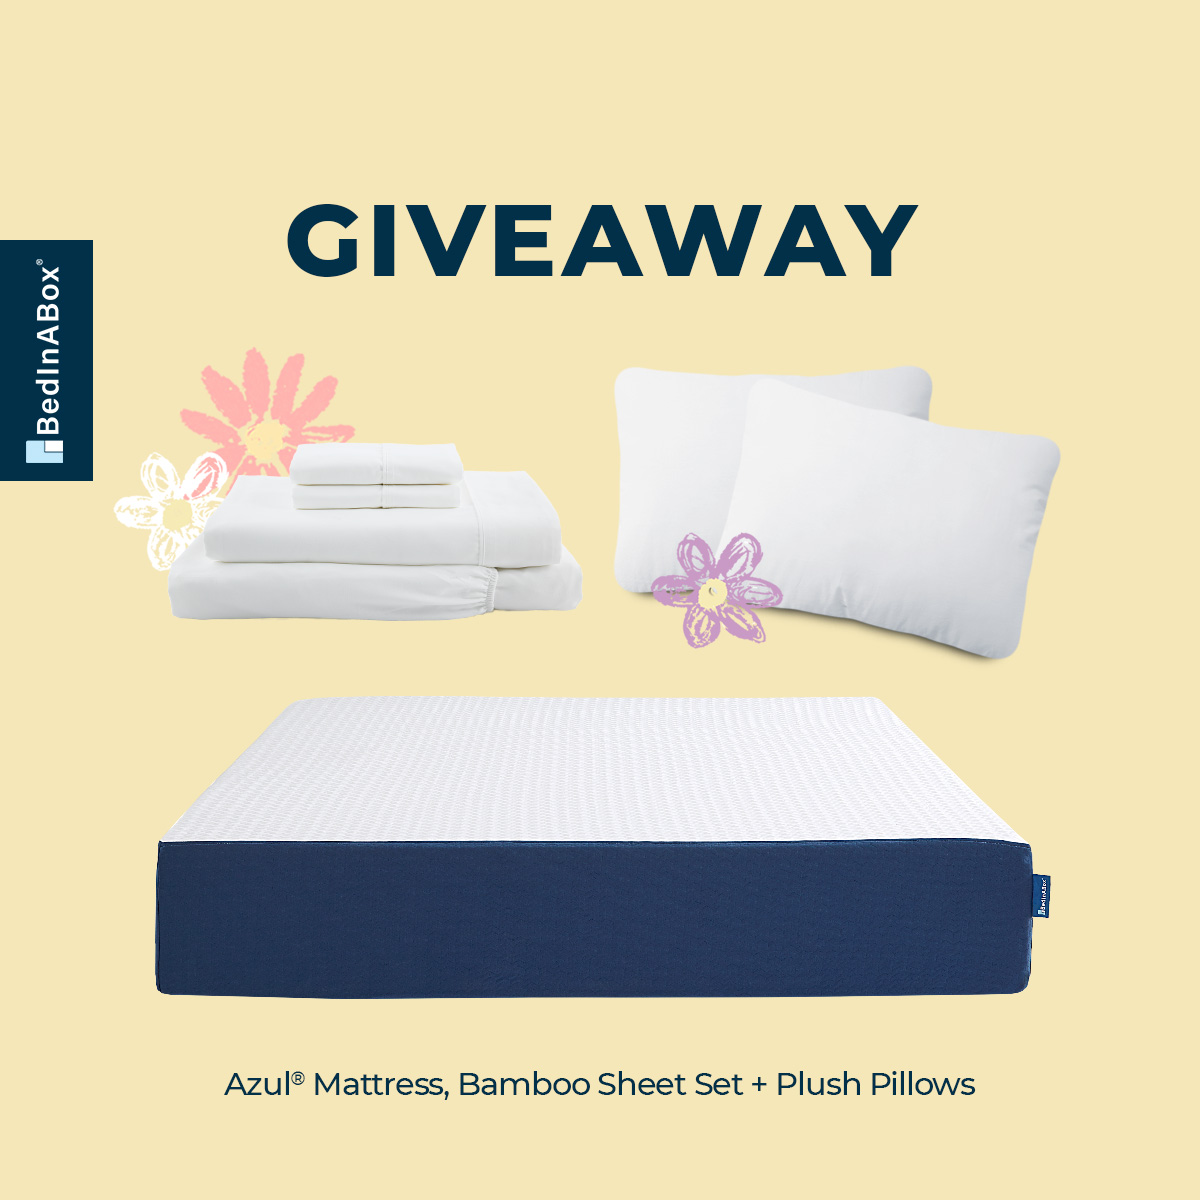 🌸 Mother’s Day Giveaway 🌸 Win an Azul® Mattress, Bamboo Sheet Set and 2 Plush Pillows! Follow @bedinabox⁣⁣ & repost this post to enter.

*Giveaway ends 5/12/24. Must be 18 years or older and a U.S. resident to enter. Winner will be contacted via official BedInABox account.